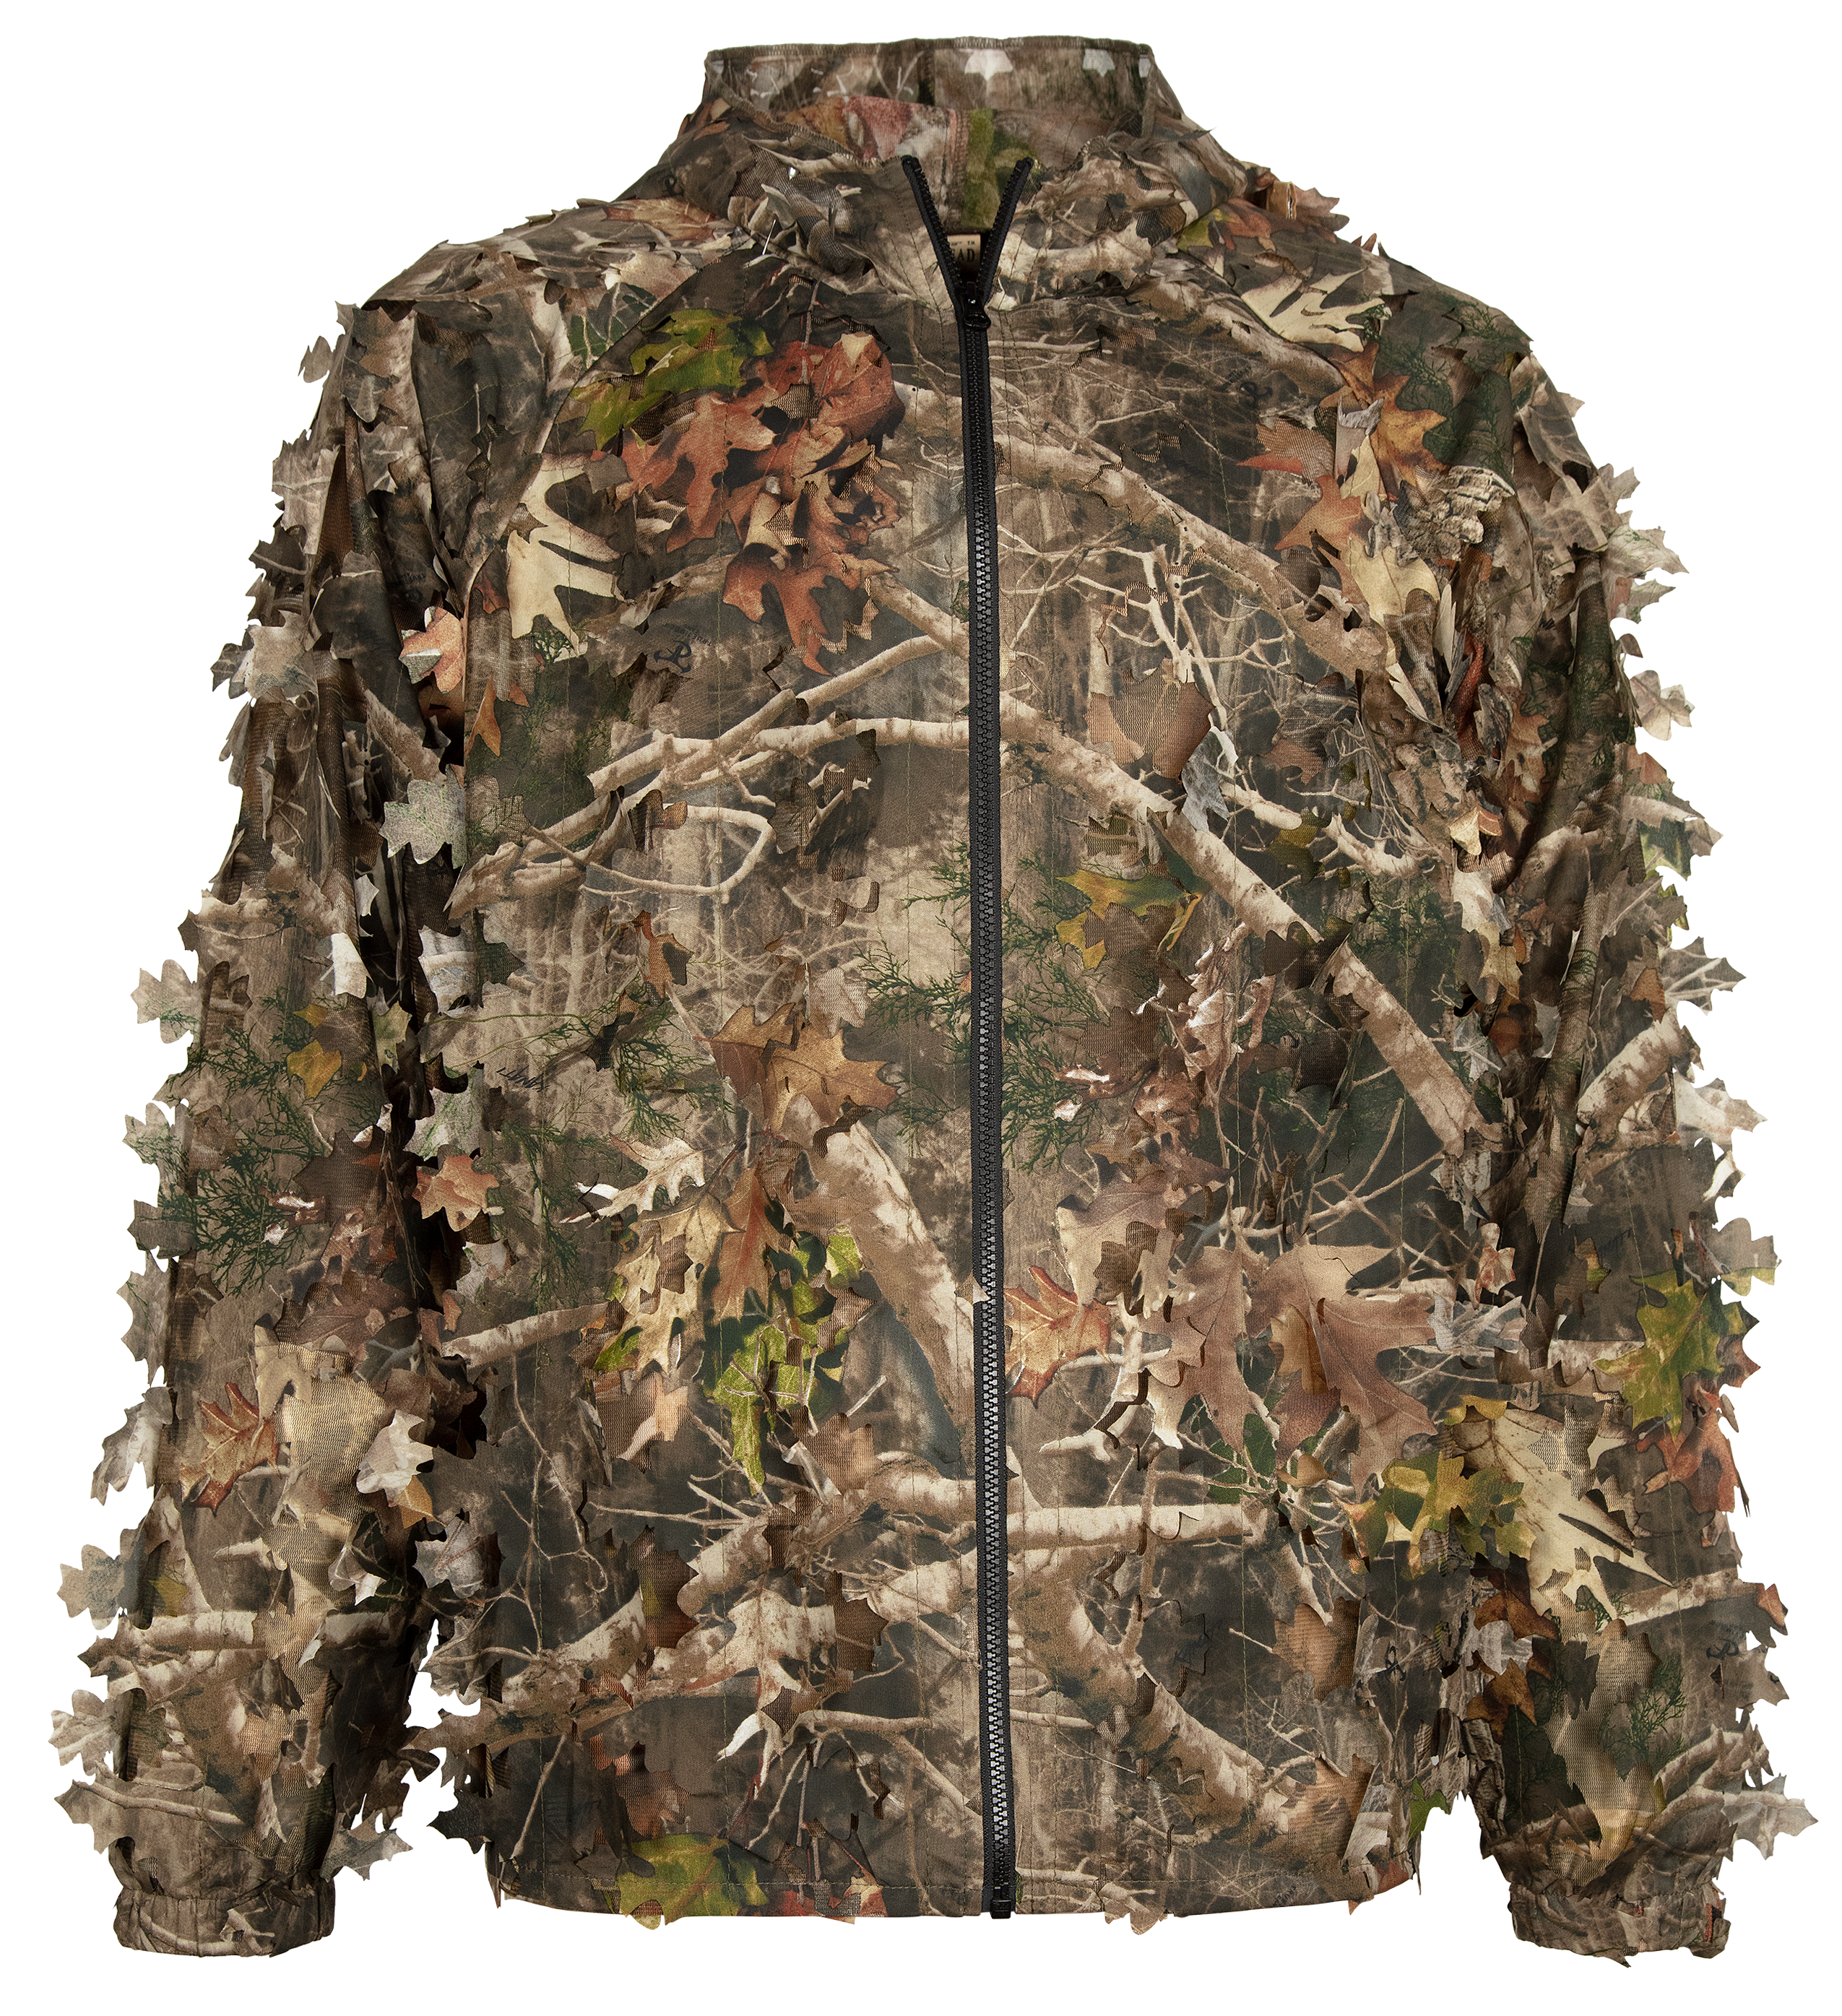 RedHead Open Mesh Leafy Hunting Jacket for Men